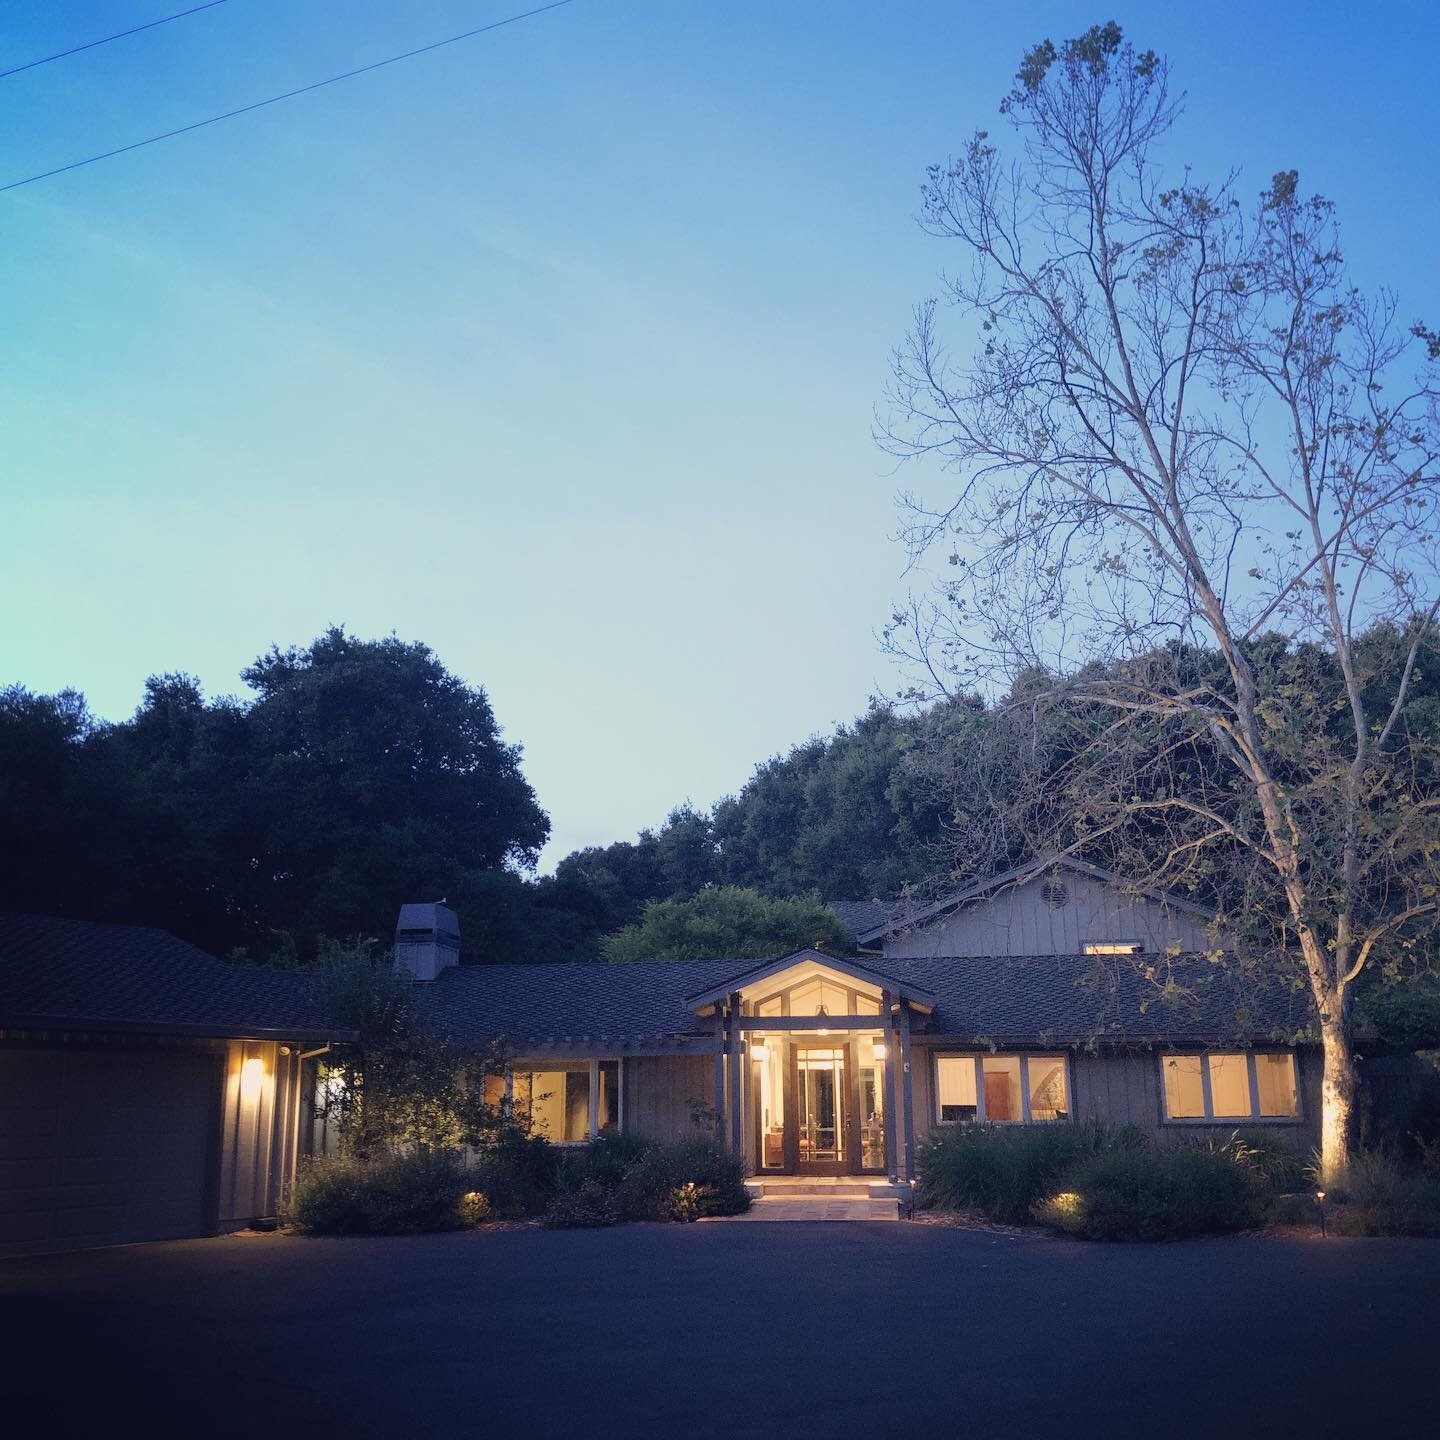 Coming Soon! - Need the perfect home to shelter in place? Here&rsquo;s a home that has all the acreage you&rsquo;ll need, plus it&rsquo;s only 10 mins away from the new Apple campus! - Twilight shoots -

If you&rsquo;re wondering what the state of th